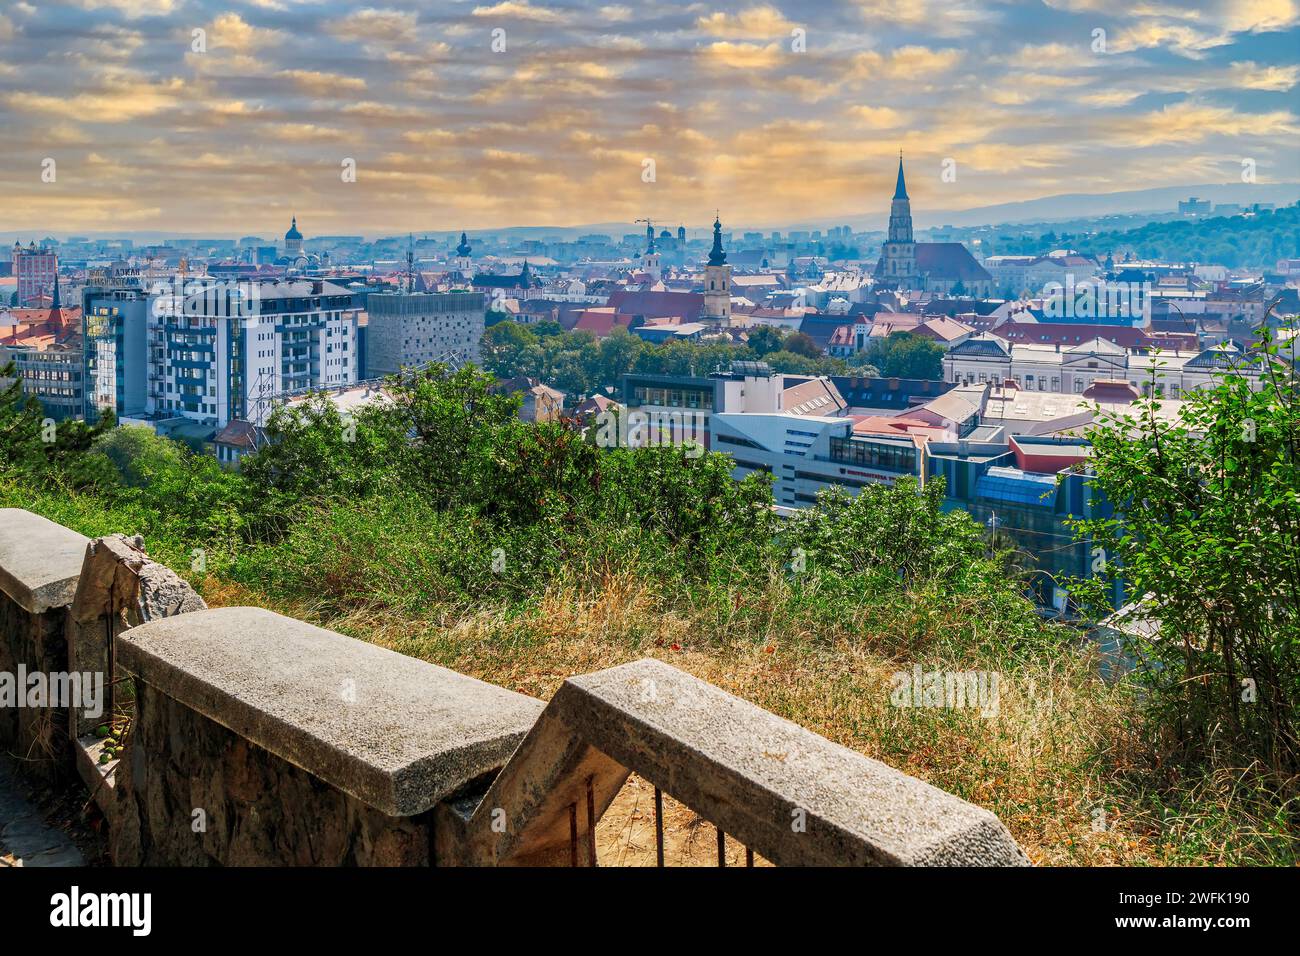 CLUJ-NAPOCA, ROMANIA - SEPTEMBER 20, 2020: Panoramic and aerial view over the city from Citadel Hill. Stock Photo